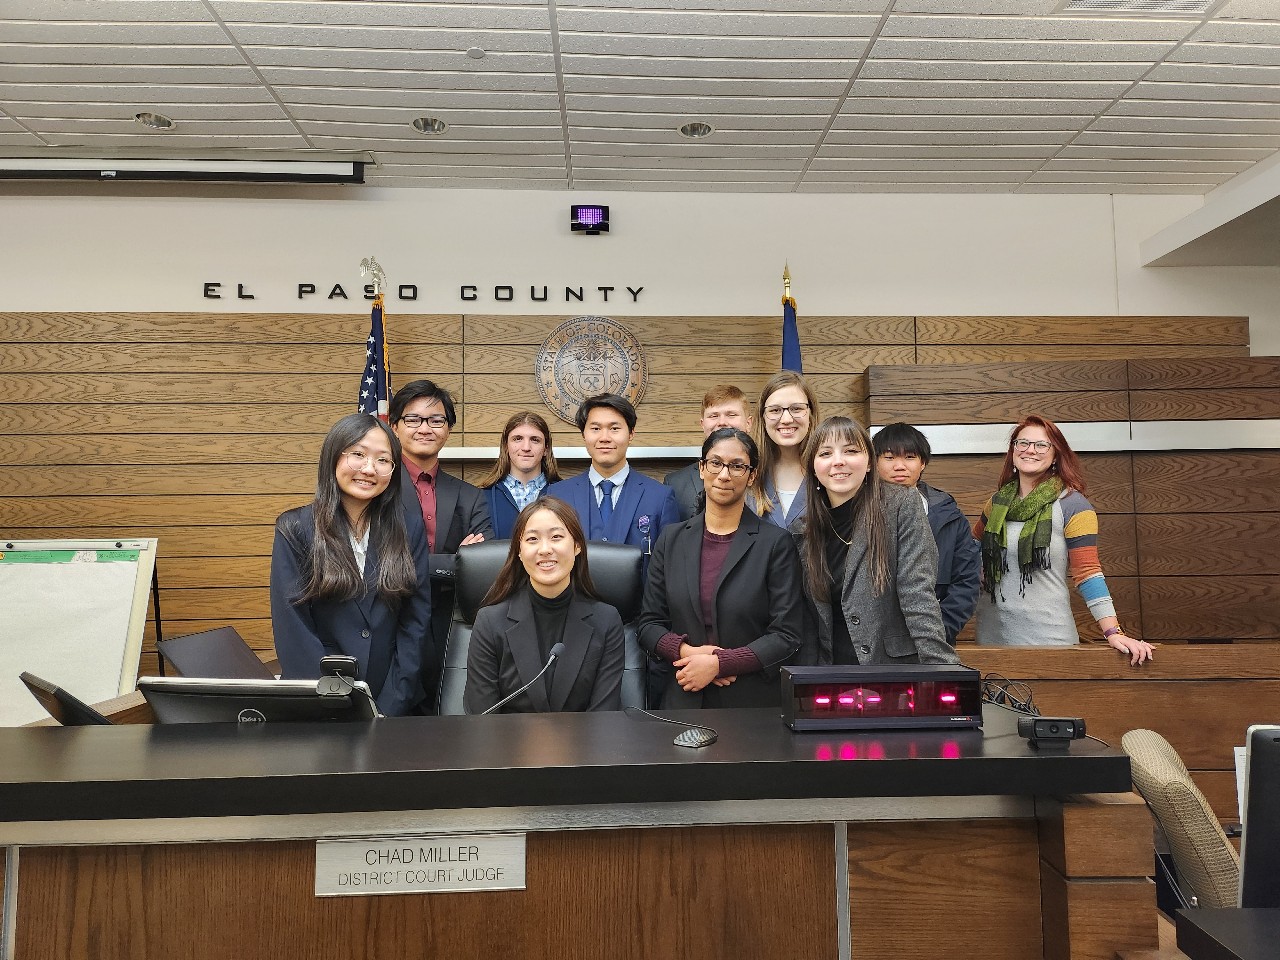 Students standing in front of the judge's bench at the El Paso County Courthouse